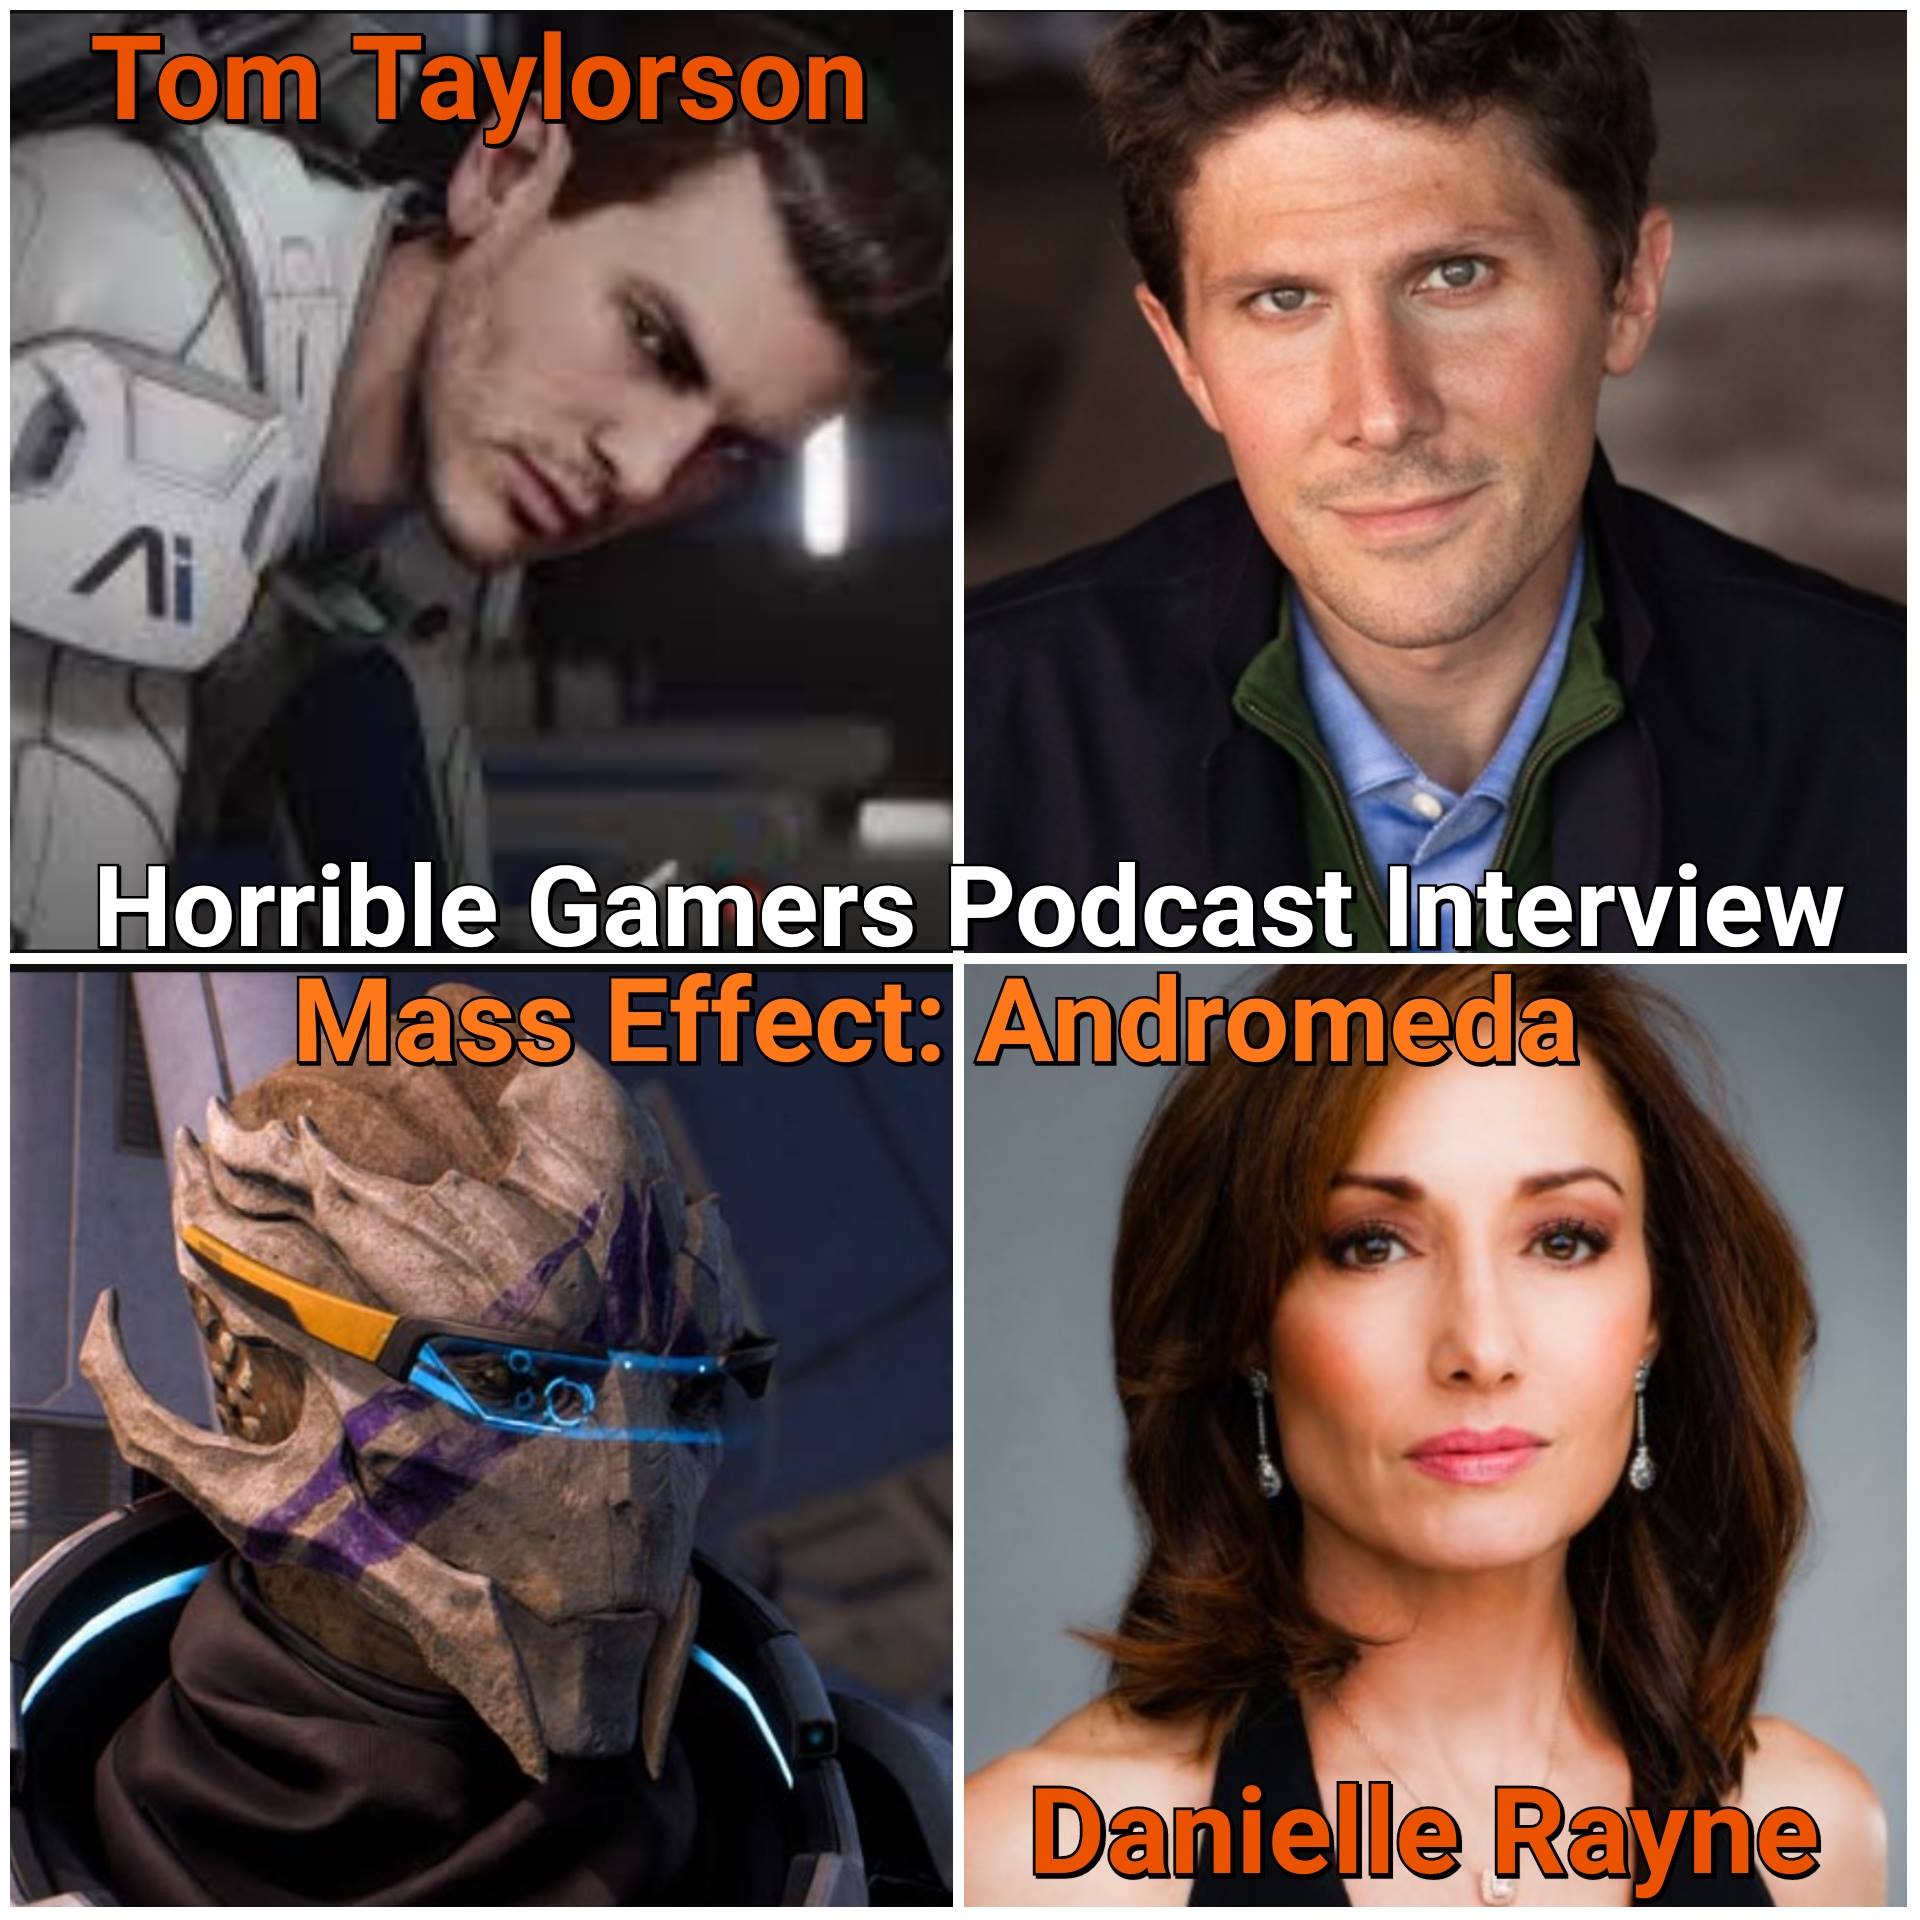 HGP/HA Mass Effect: Andromeda Interview with Tom Taylorson and Danielle Rayne